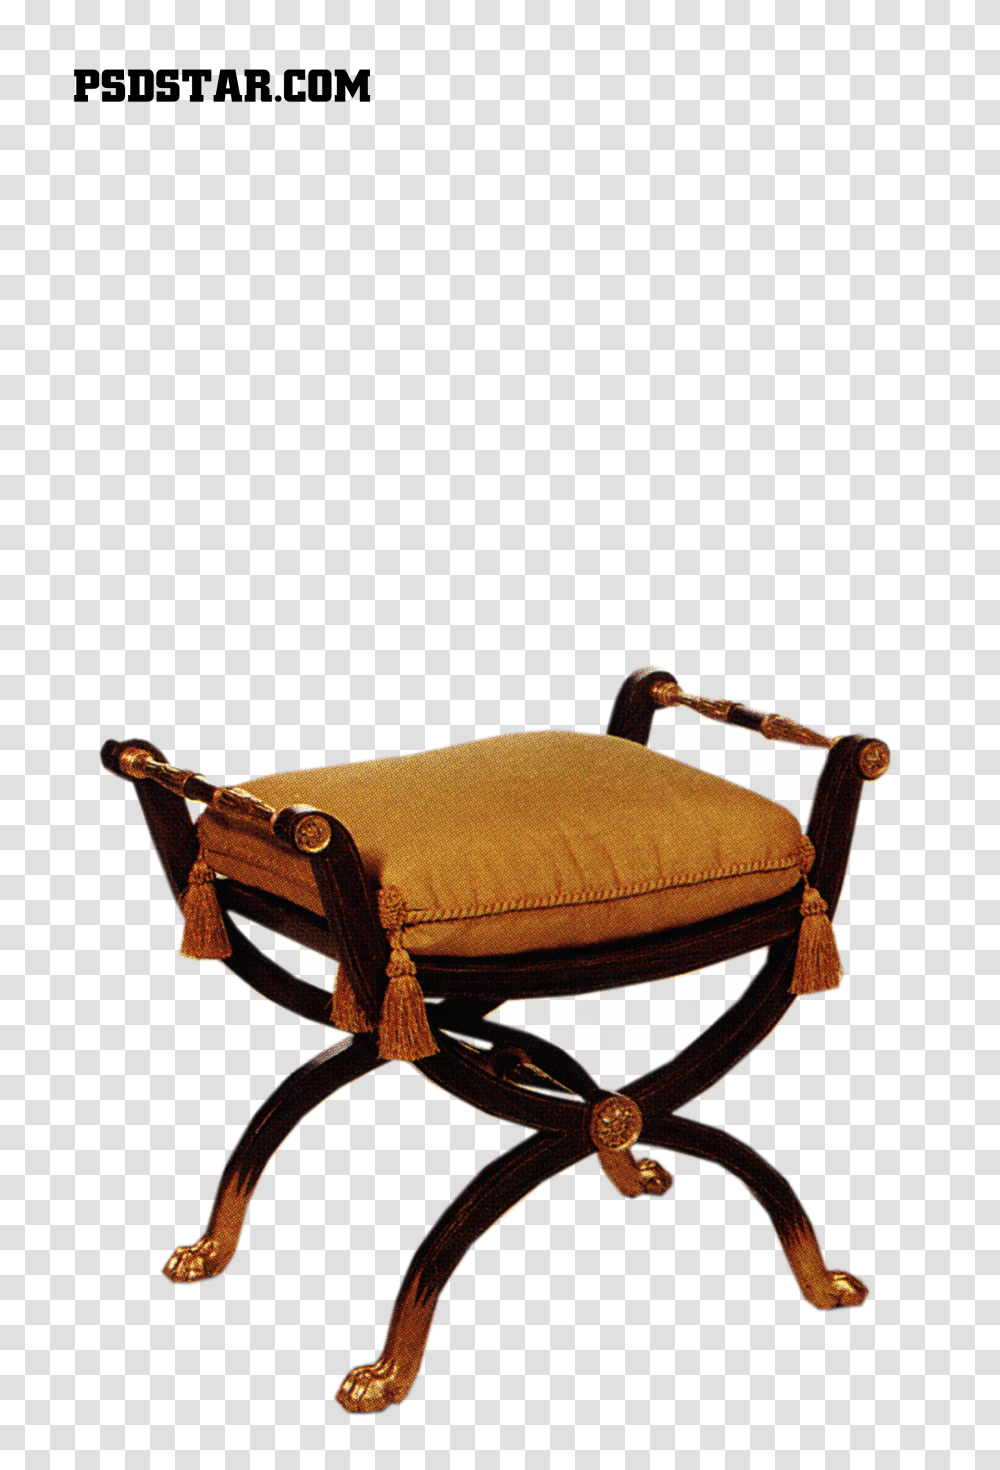 Hd Chair High Resolution For Photoshop, Furniture, Ottoman, Cradle, Tabletop Transparent Png